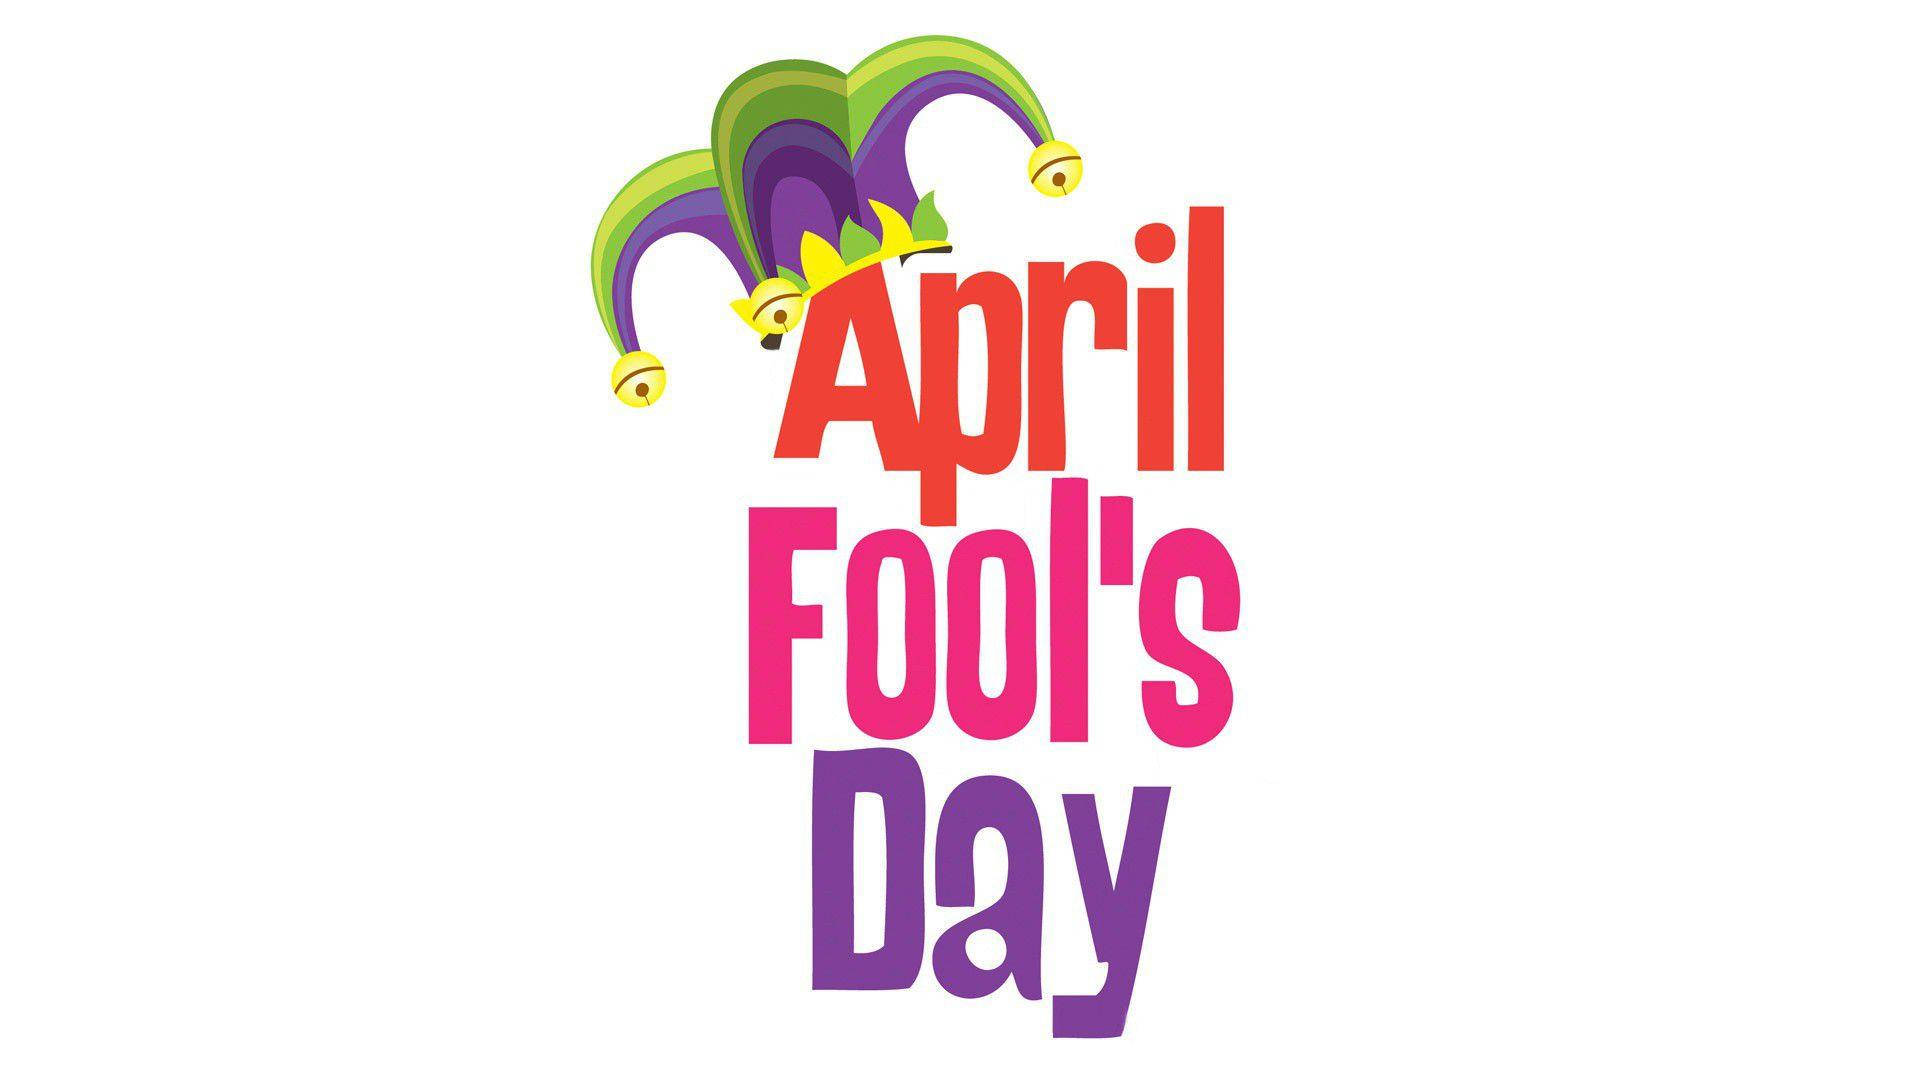 Caption: A Whimsical April Fools’ Day Celebration Wallpaper